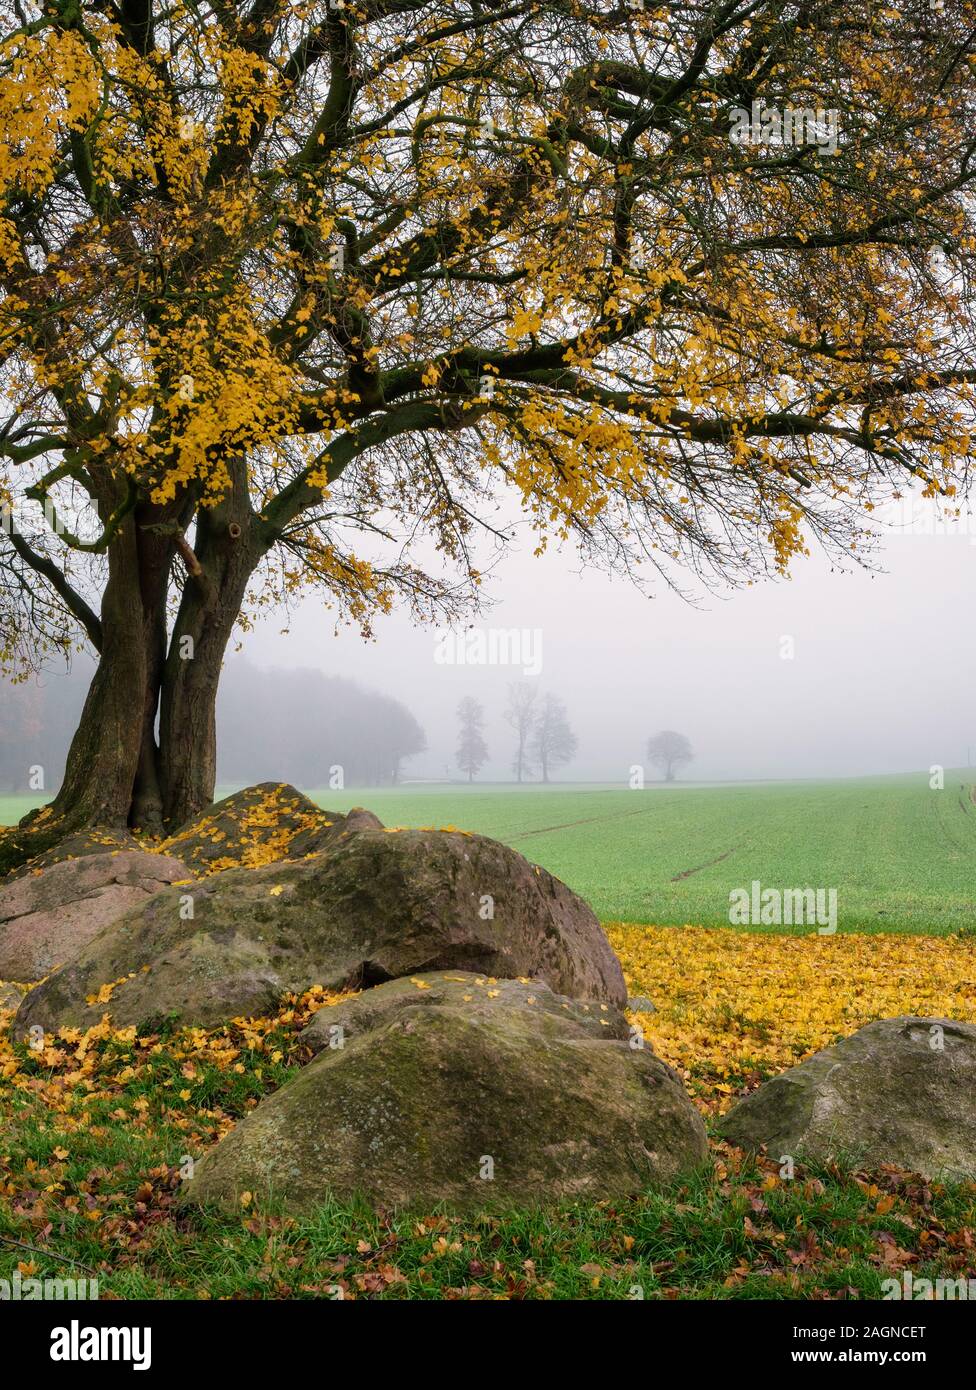 Autumnal scene at Oestringer Steine Boulders and Dolmen in Nettetal Valley, Osnabrueck, Germany Stock Photo